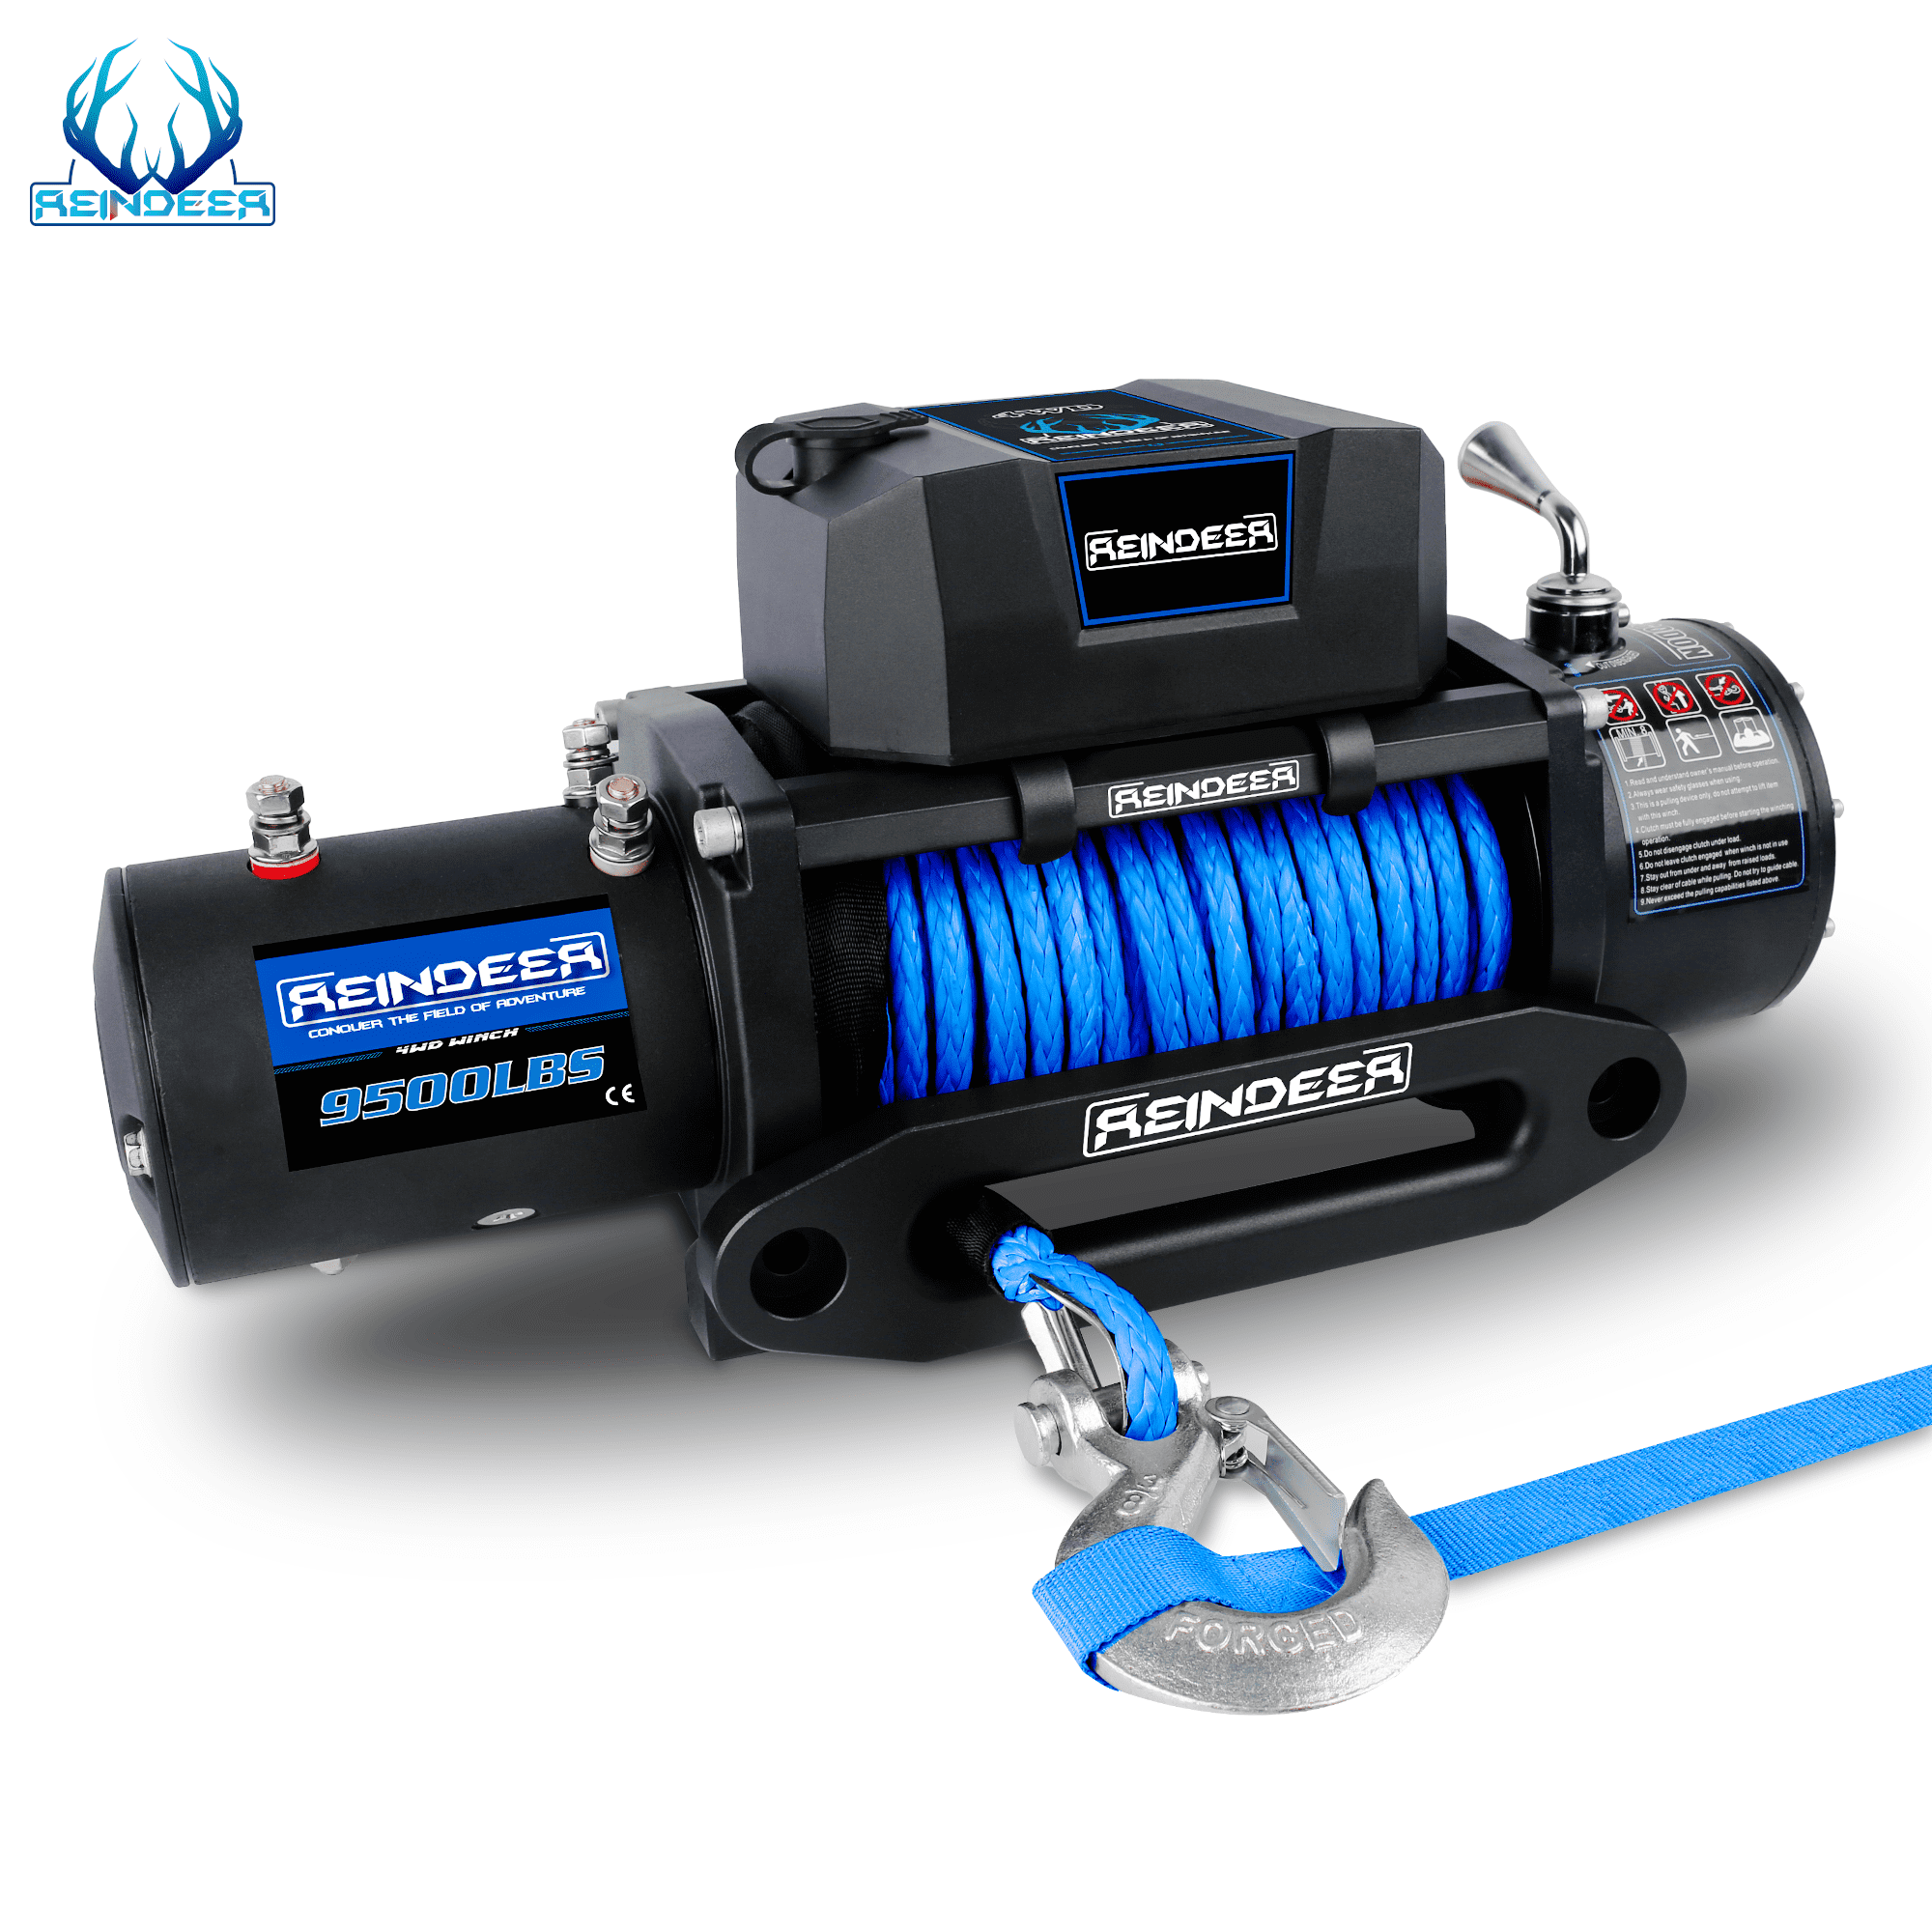 REINDEER New 12V Winch 9500 lb Load Capacity Electric Winch